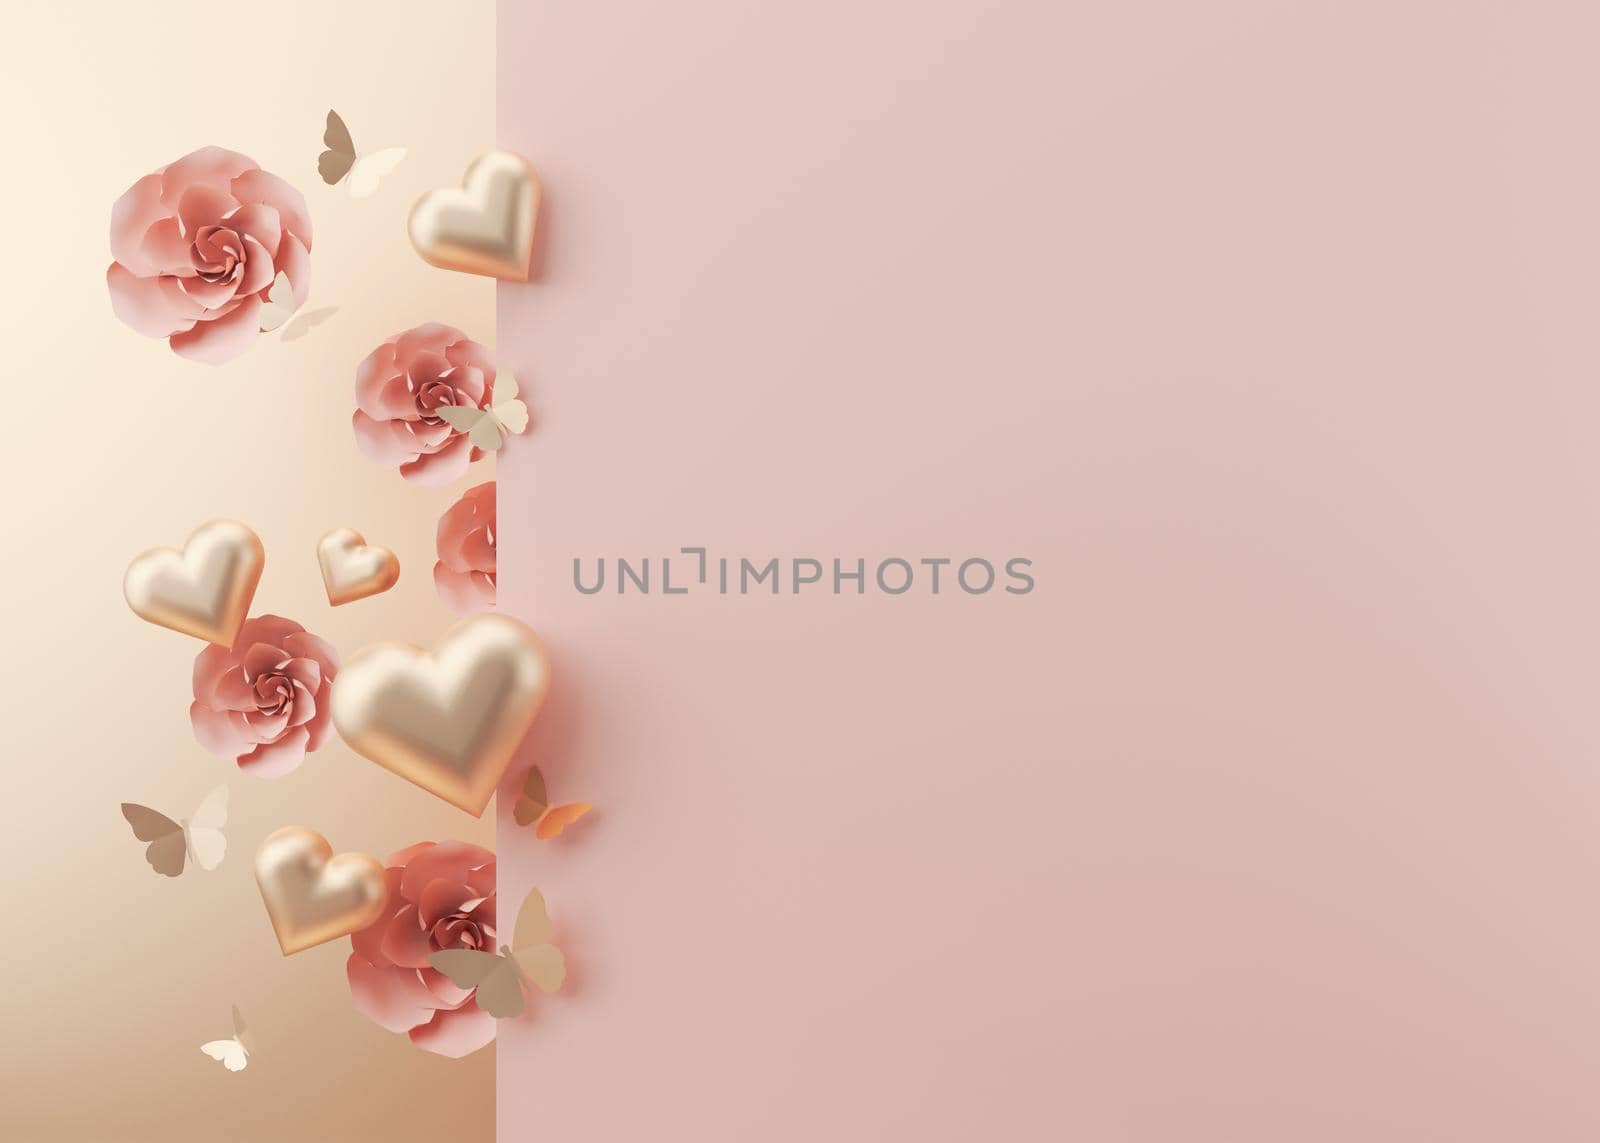 Shiny hearts, flowers and butterflies. Women's Day, Mother's Day, Wedding, Anniversary background with free space for text, copy space. Postcard, greeting card design, template. 3D illustration